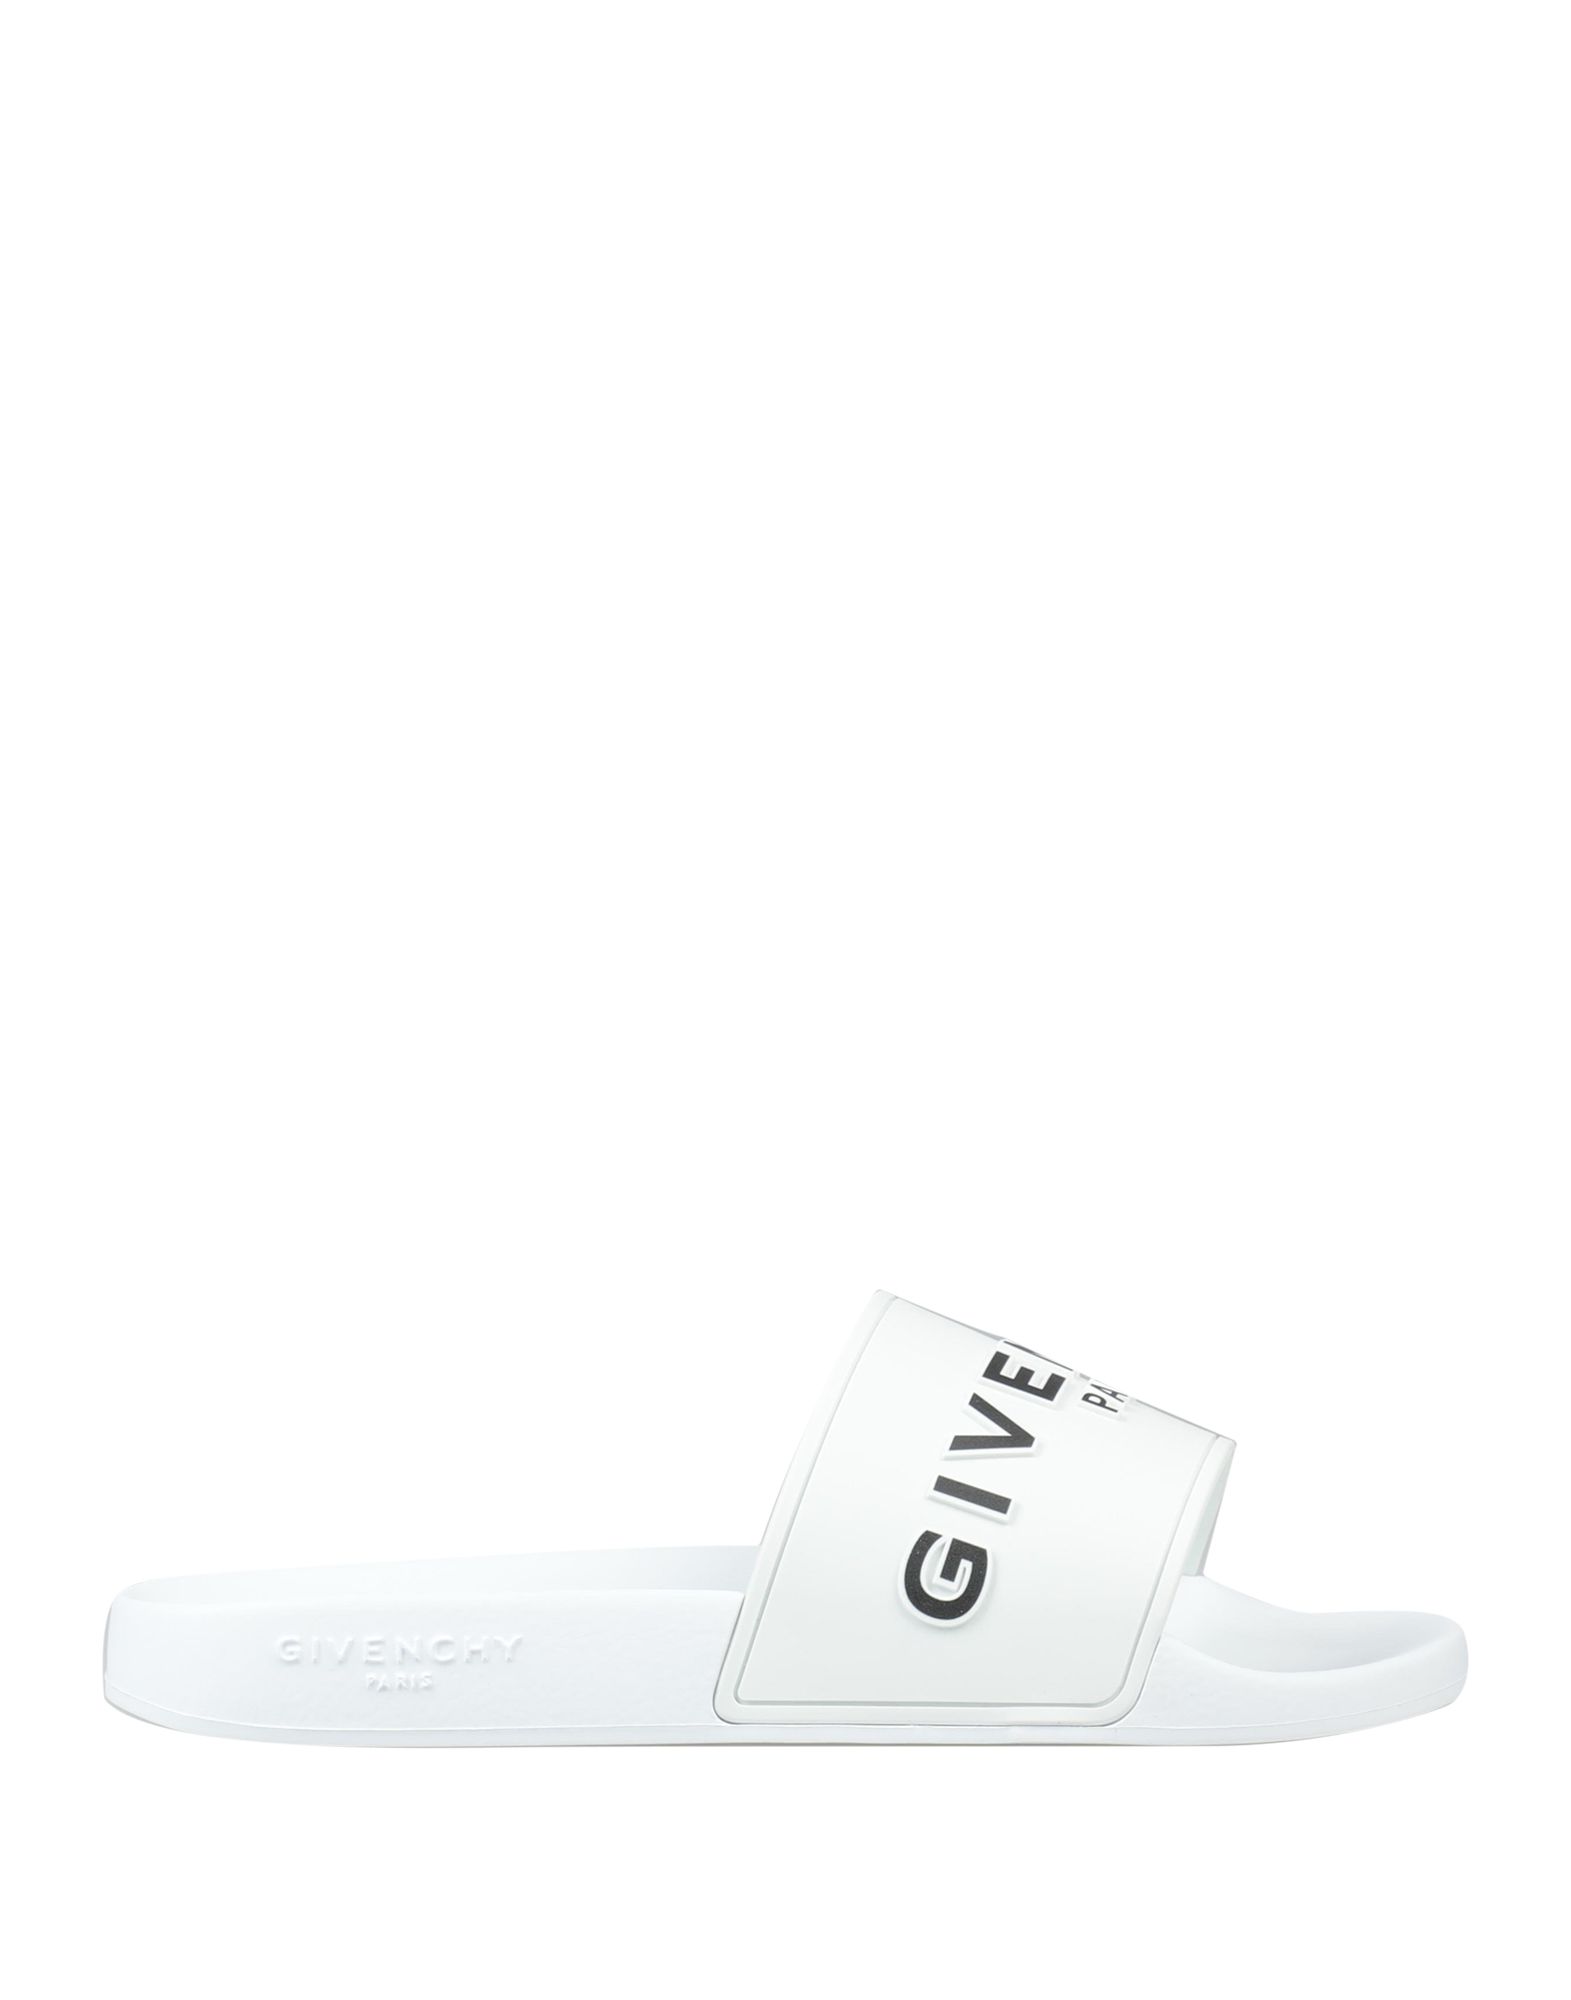 Total 55+ imagen sale givenchy slides - Abzlocal.mx